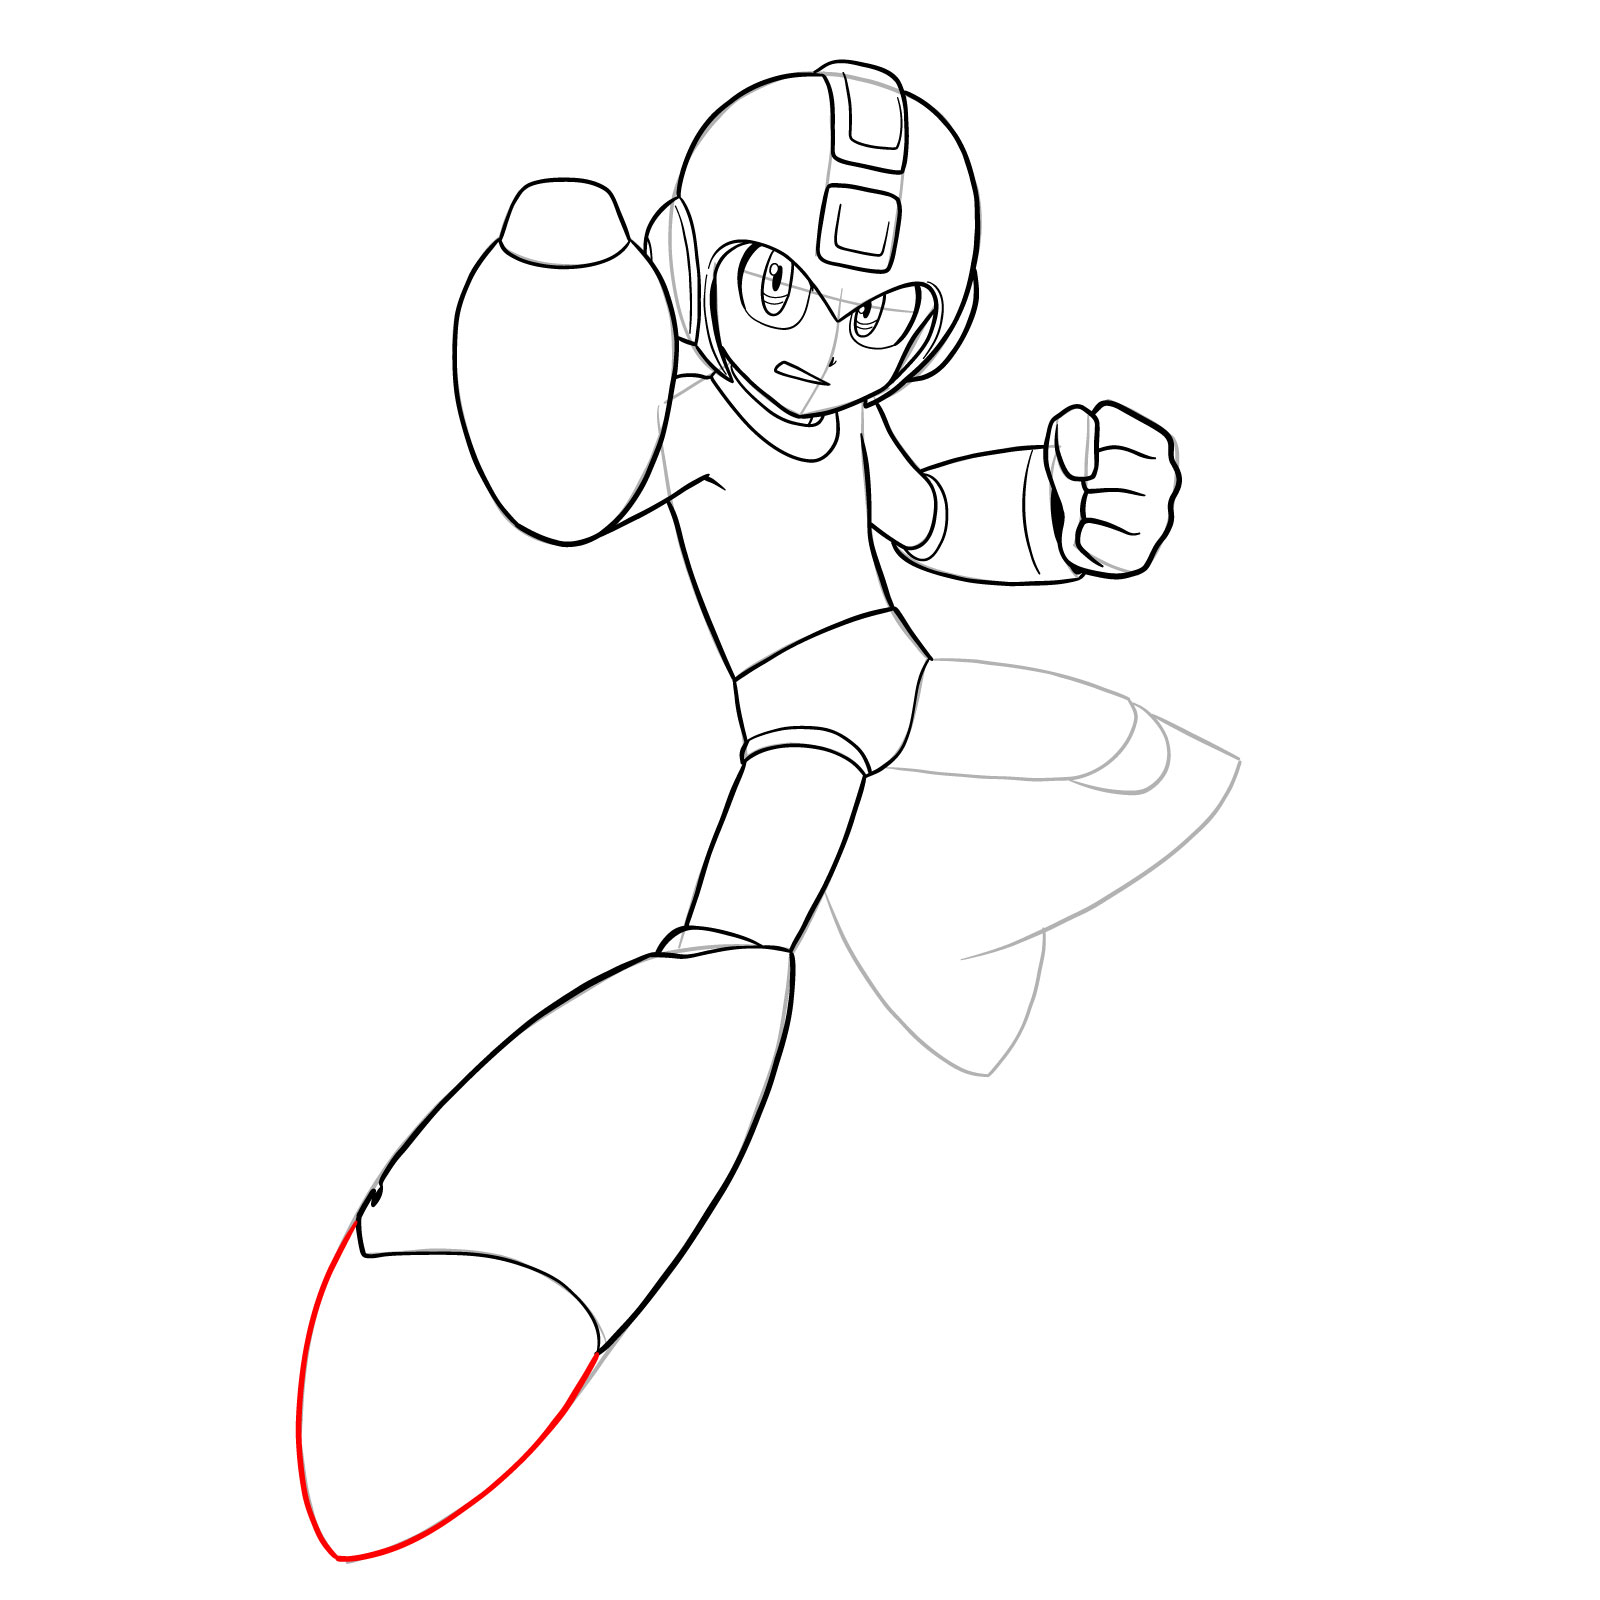 How to draw Mega Man from the 11th game - step 24